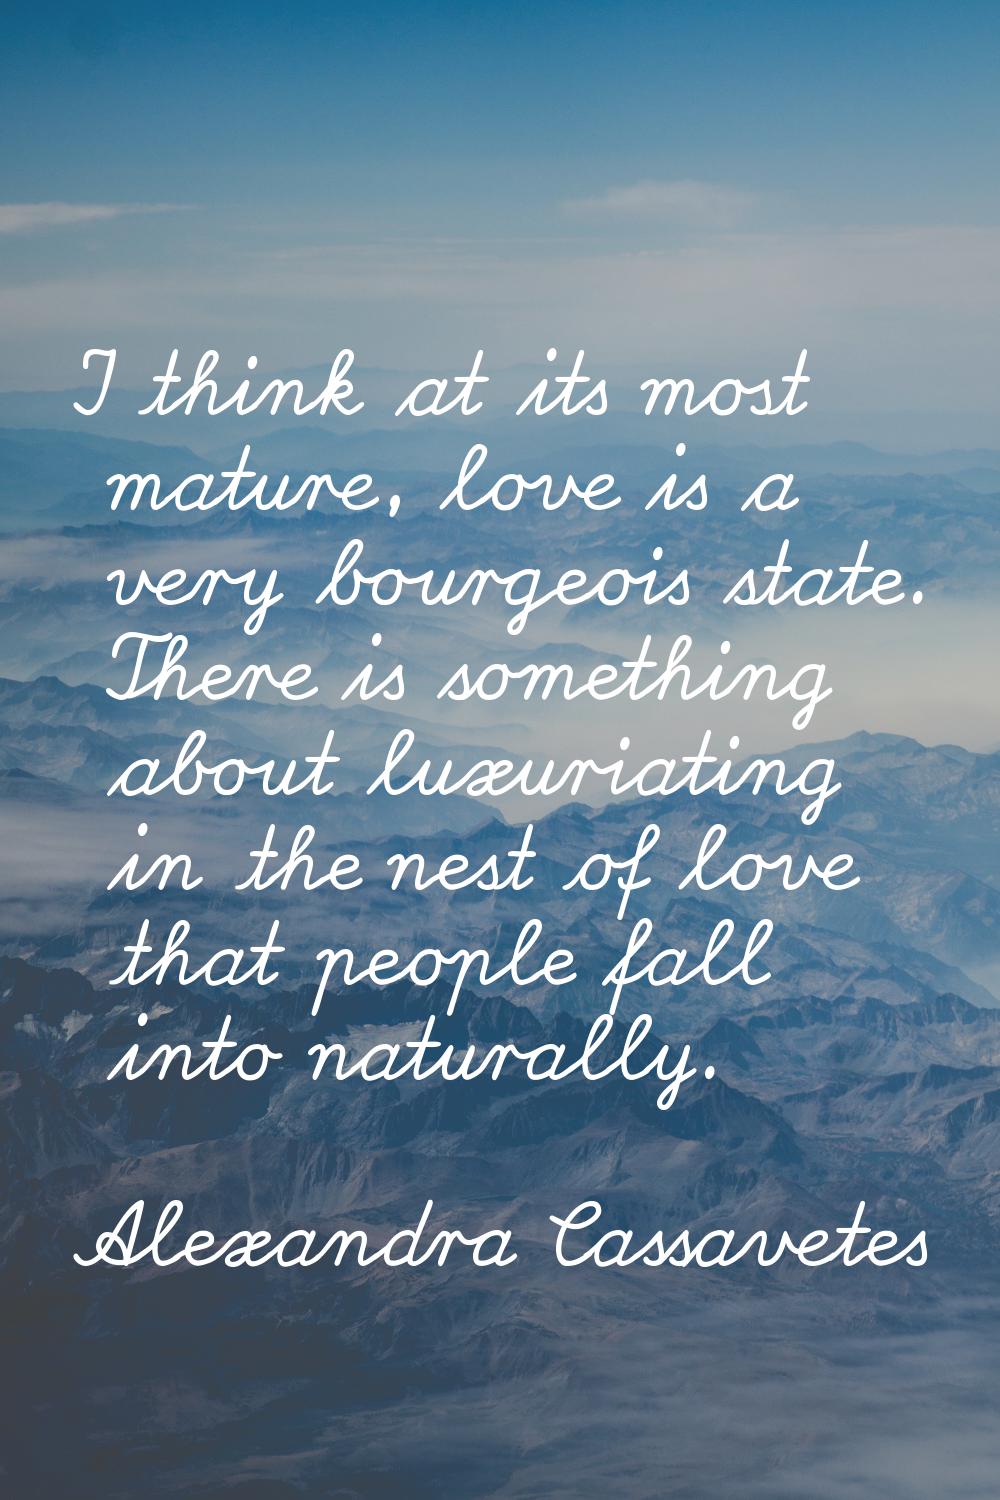 I think at its most mature, love is a very bourgeois state. There is something about luxuriating in